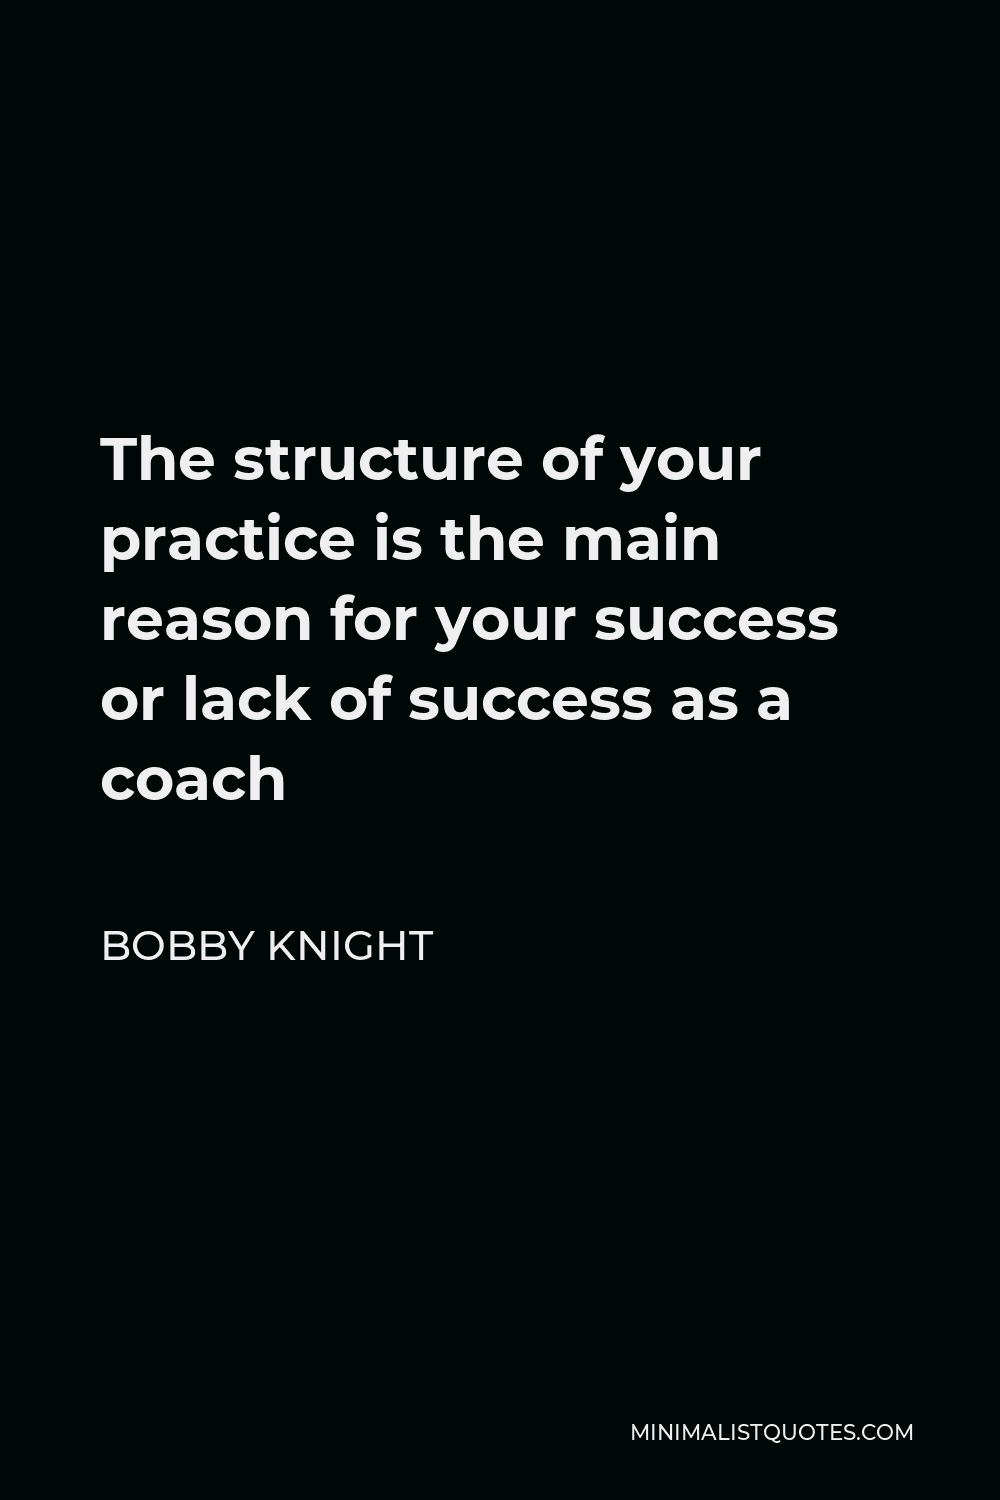 Bobby Knight Quote - The structure of your practice is the main reason for your success or lack of success as a coach